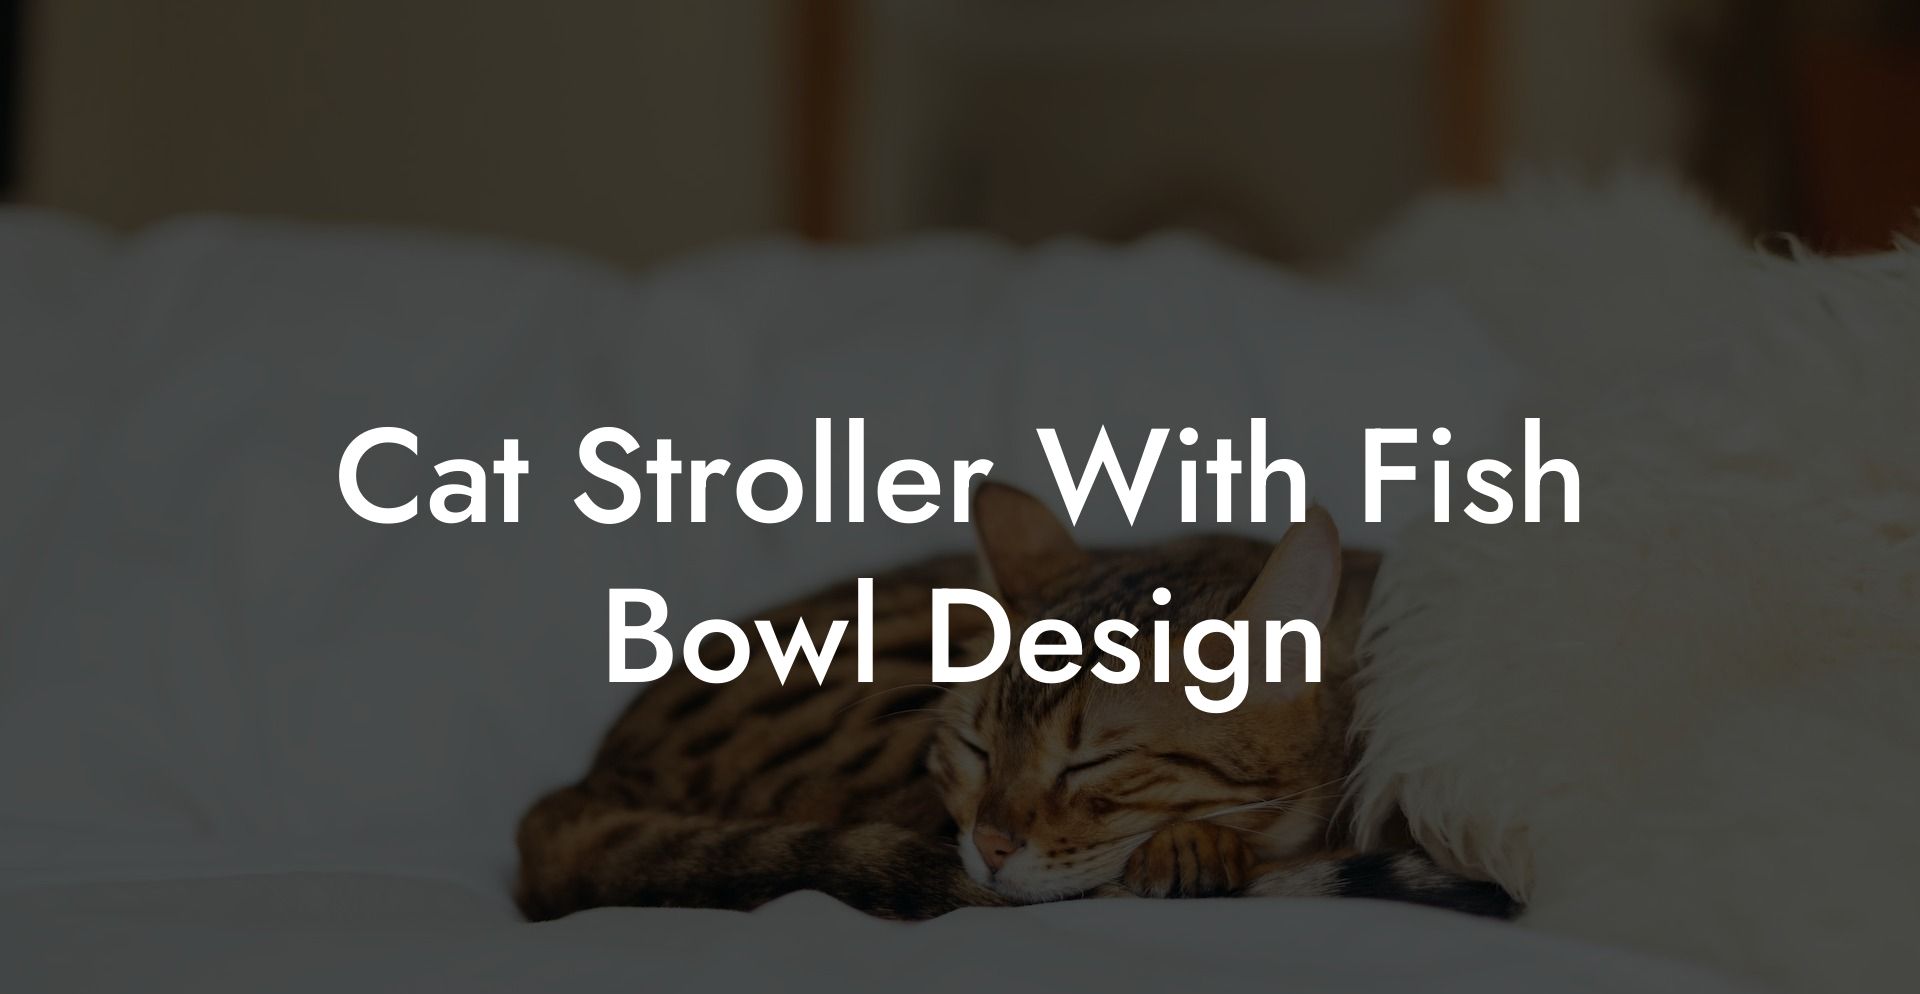 Cat Stroller With Fish Bowl Design